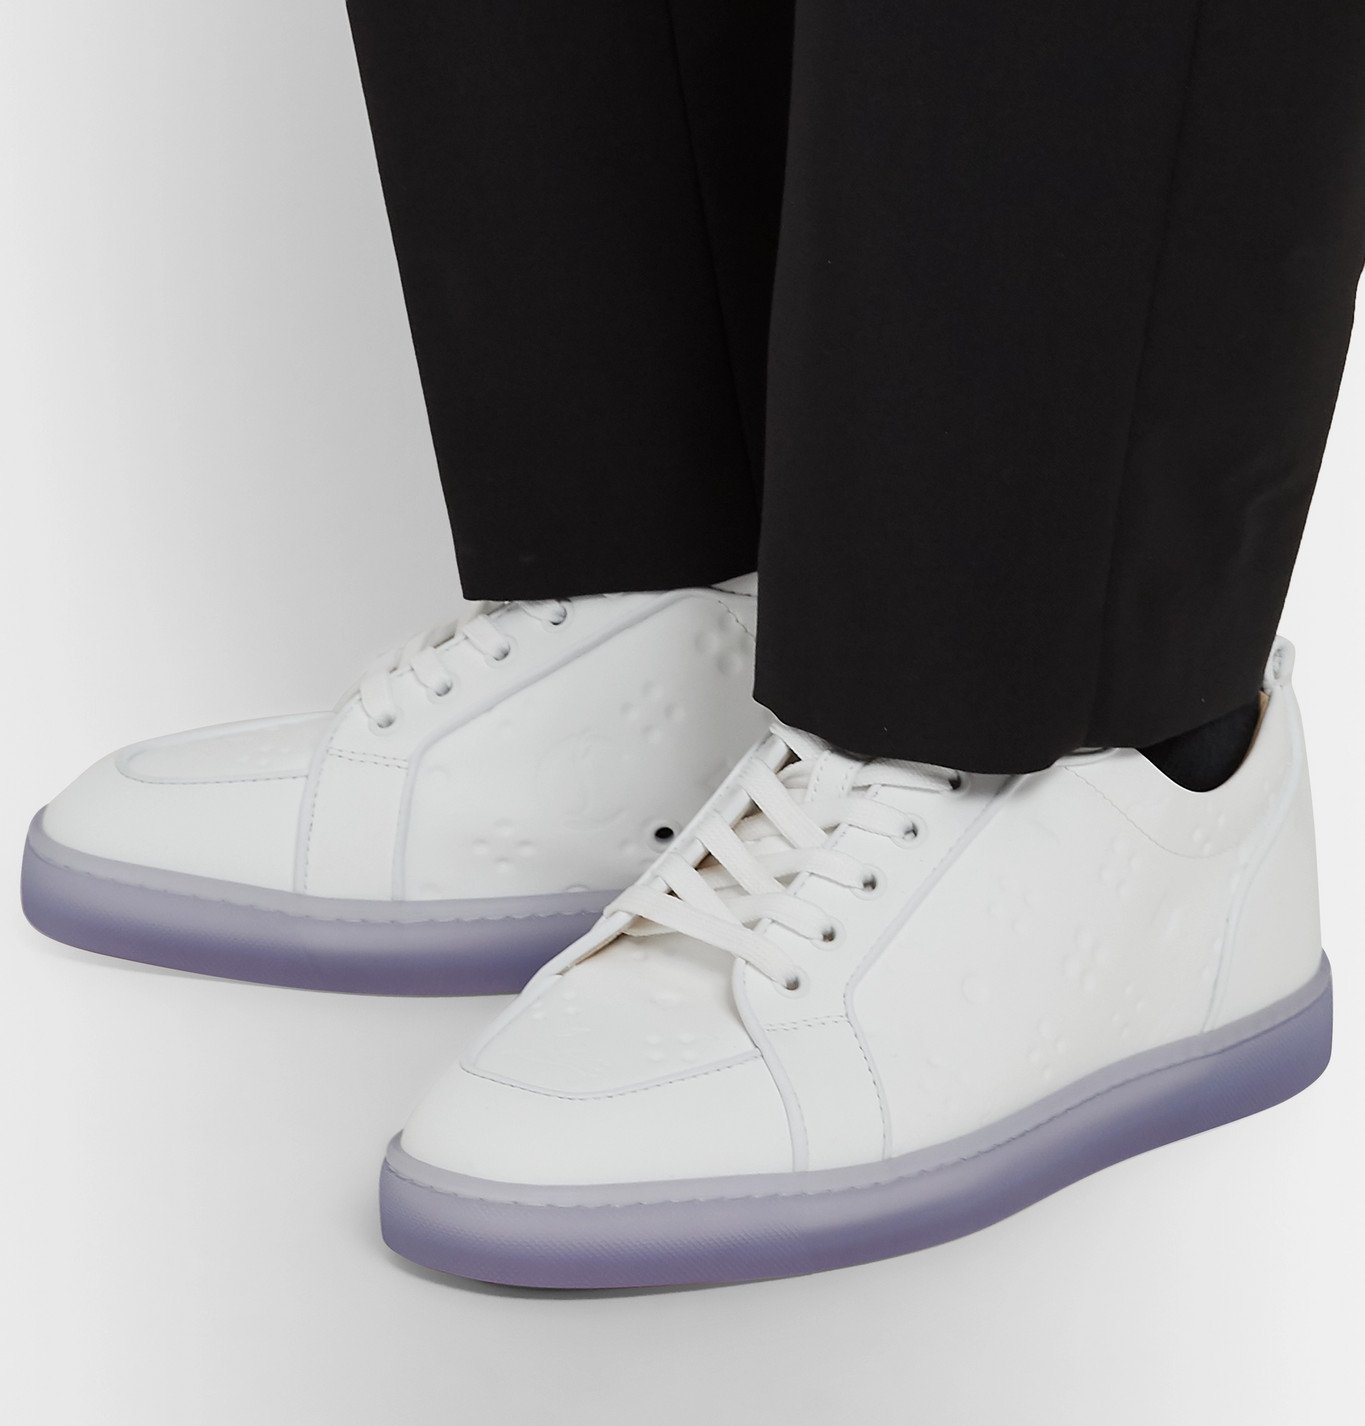 Tæmme appel Ond Christian Louboutin - Rantulow Orlato Debossed Leather Sneakers - White  Christian Louboutin